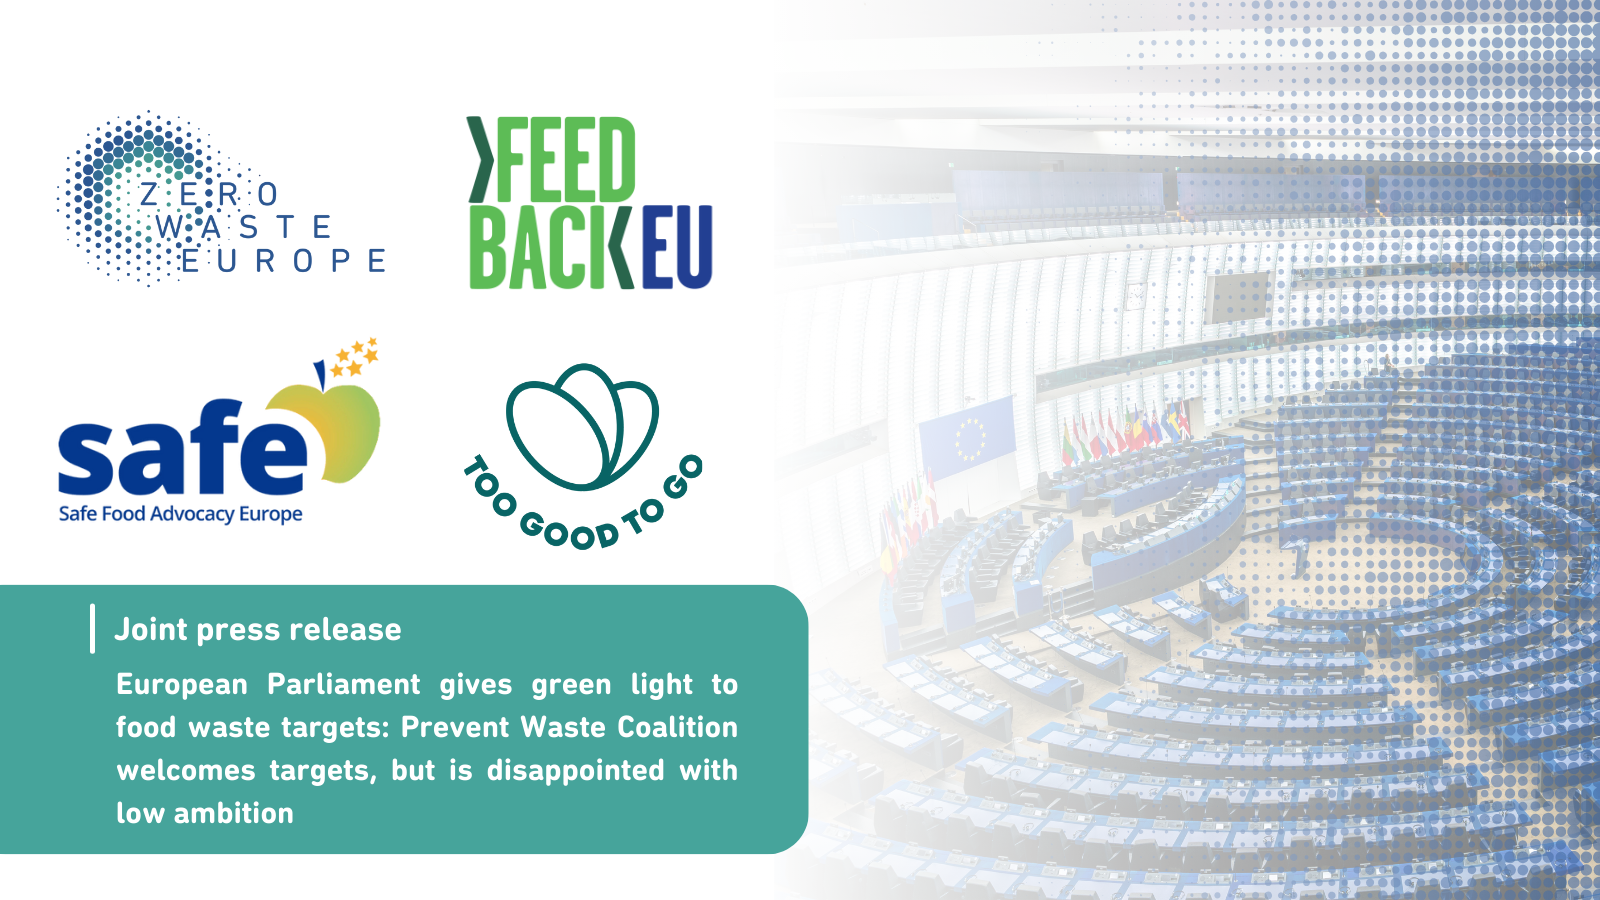 European Parliament gives green light to food waste targets: Prevent Waste Coalition disappointed about low ambition